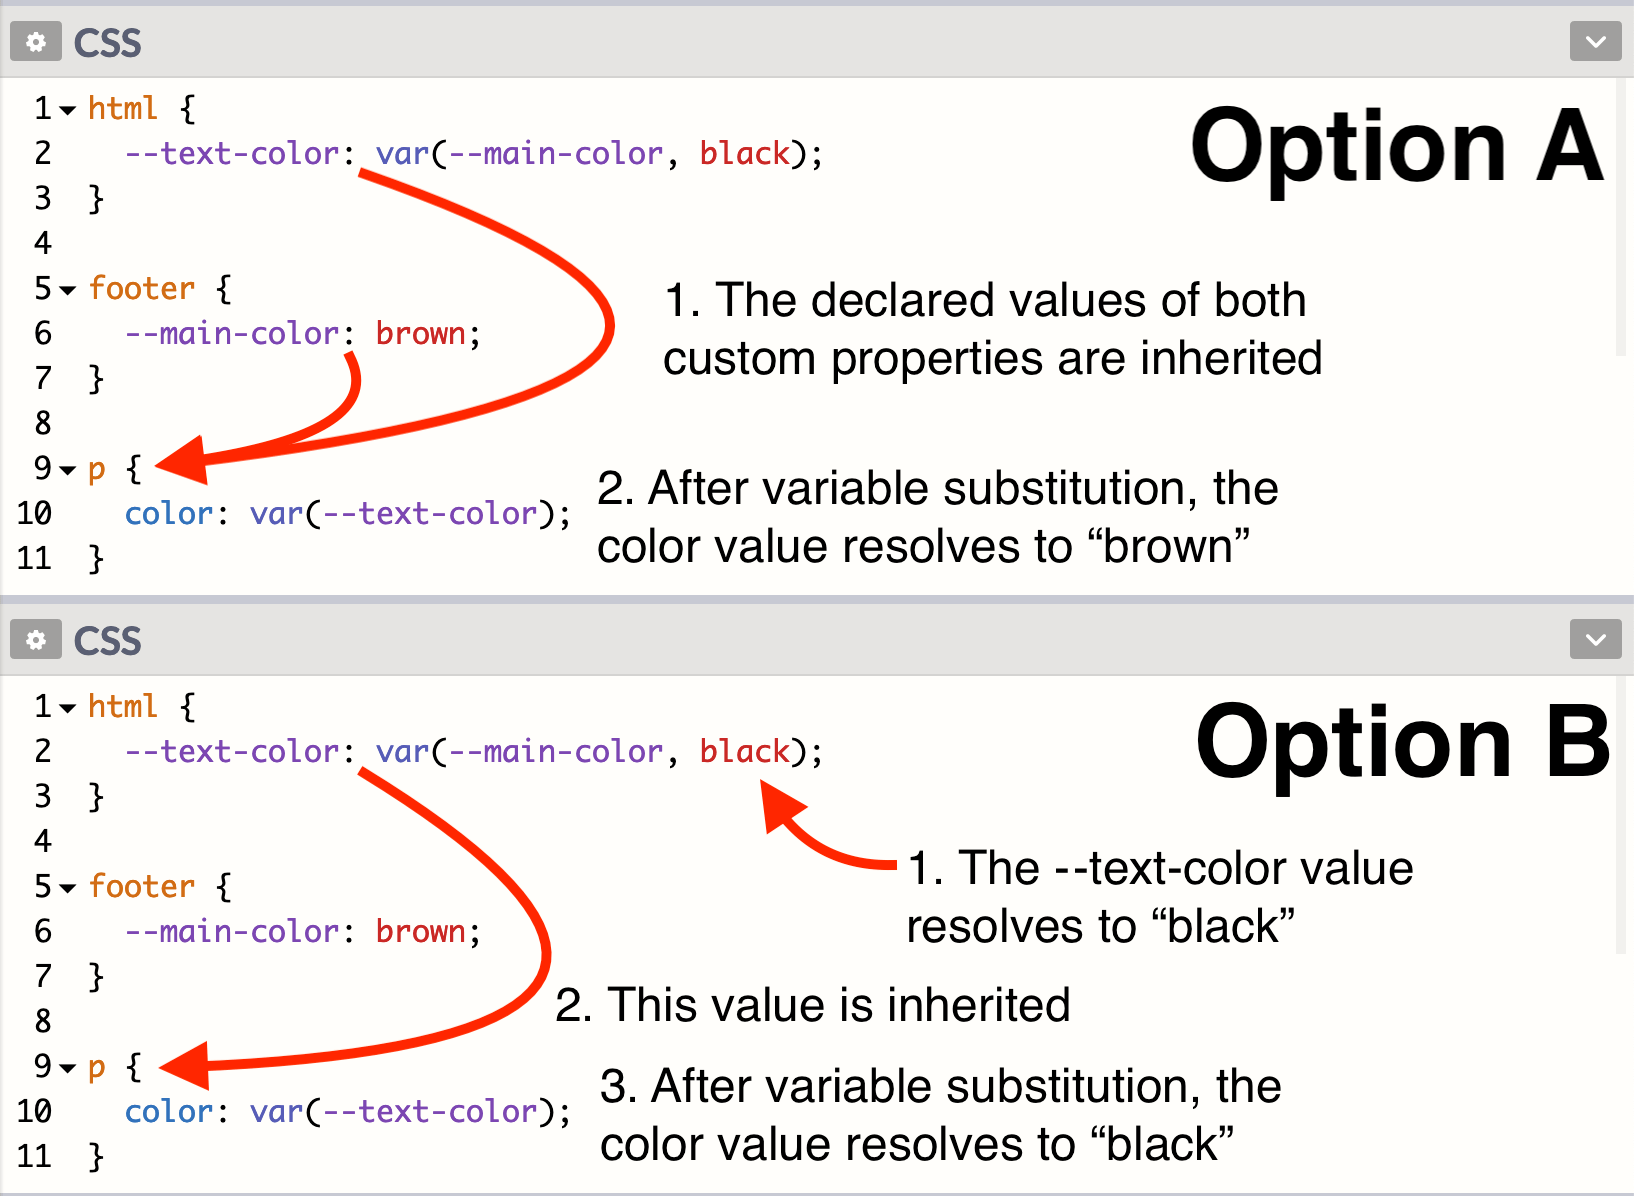 Two CSS rulesets, one as Option A and the other as Option B, both showing how variables are inherited and resolved between elements.